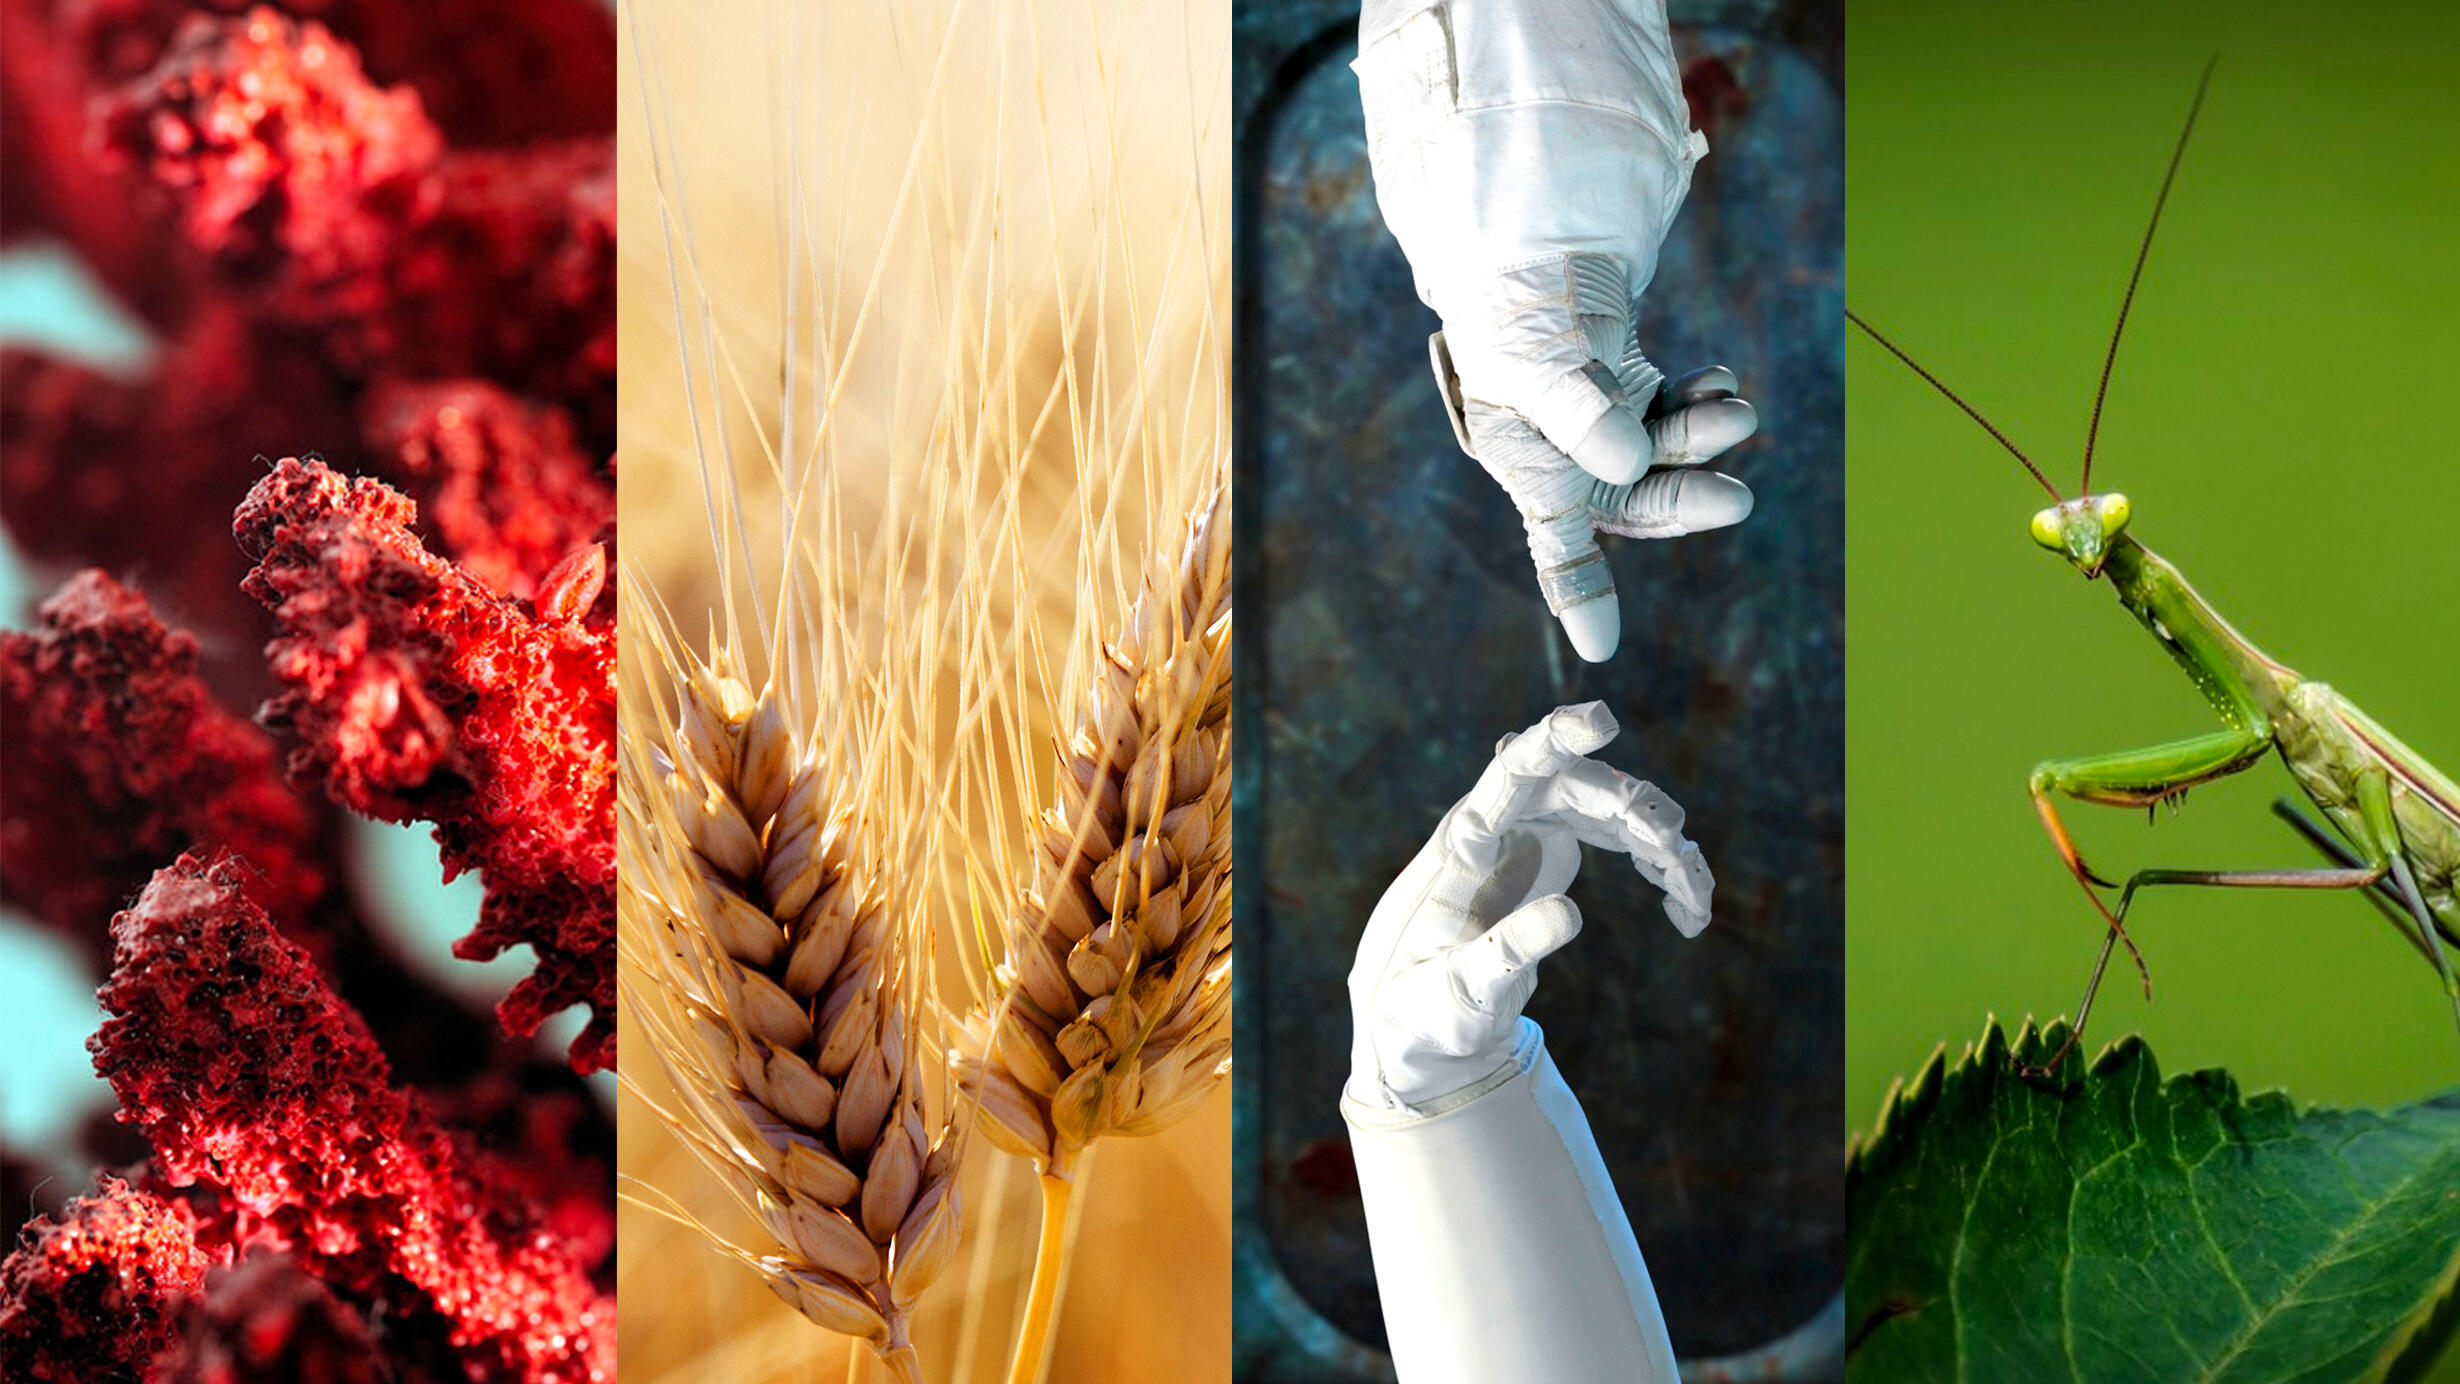 Four vertical images: objects with many small bumps, two stalks of wheat, two gloved hands reaching for one another, a praying mantis on a leaf.